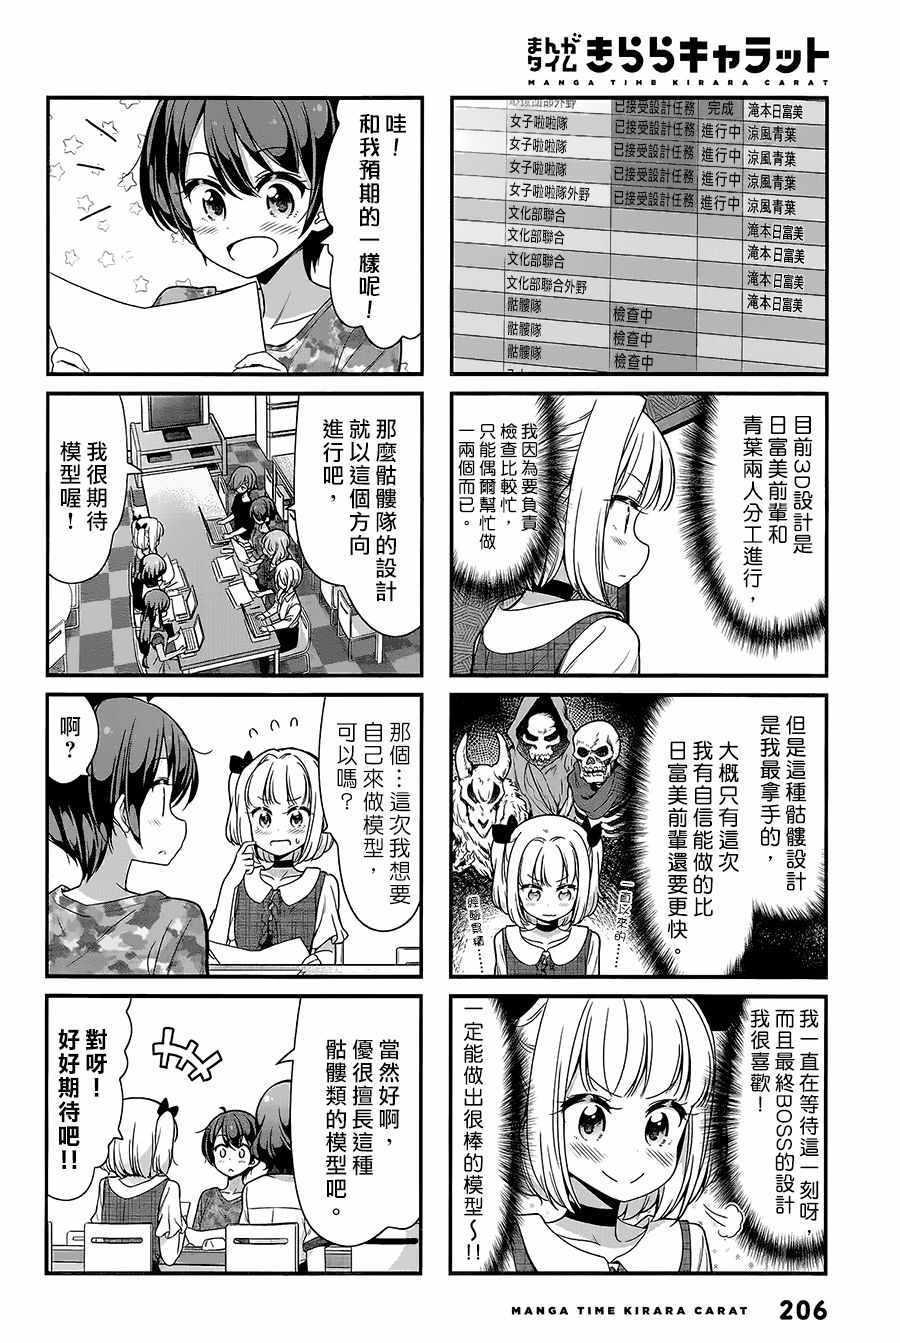 《New Game!》漫画 New Game 094集